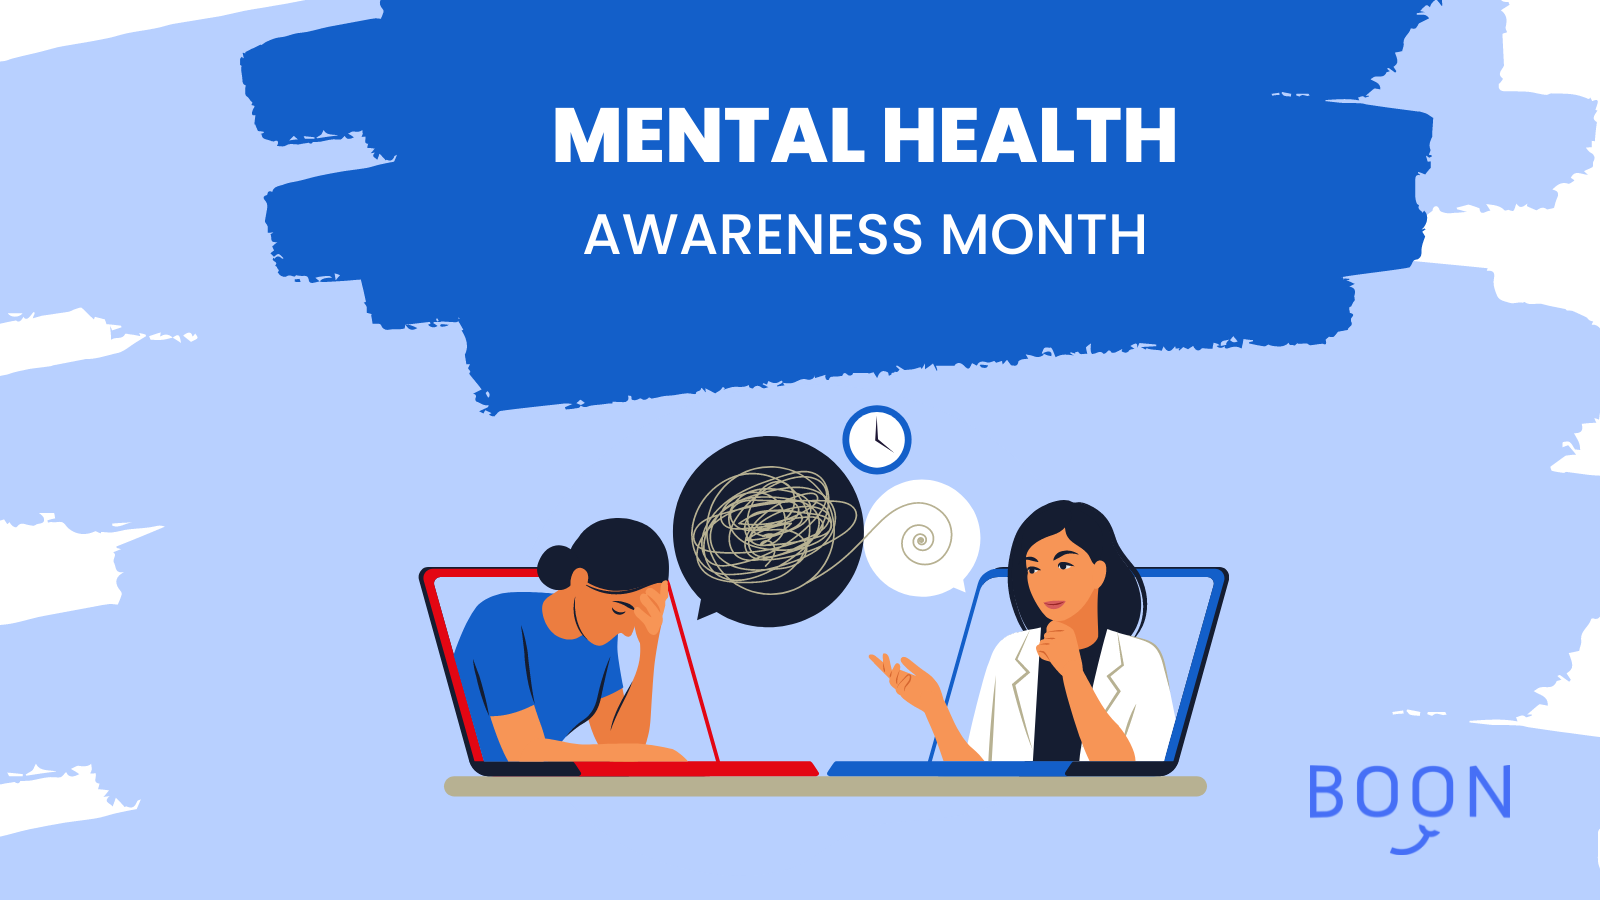 How Edge Logistics Supports Our Employees’ Well-Being for Mental Health Awareness Month